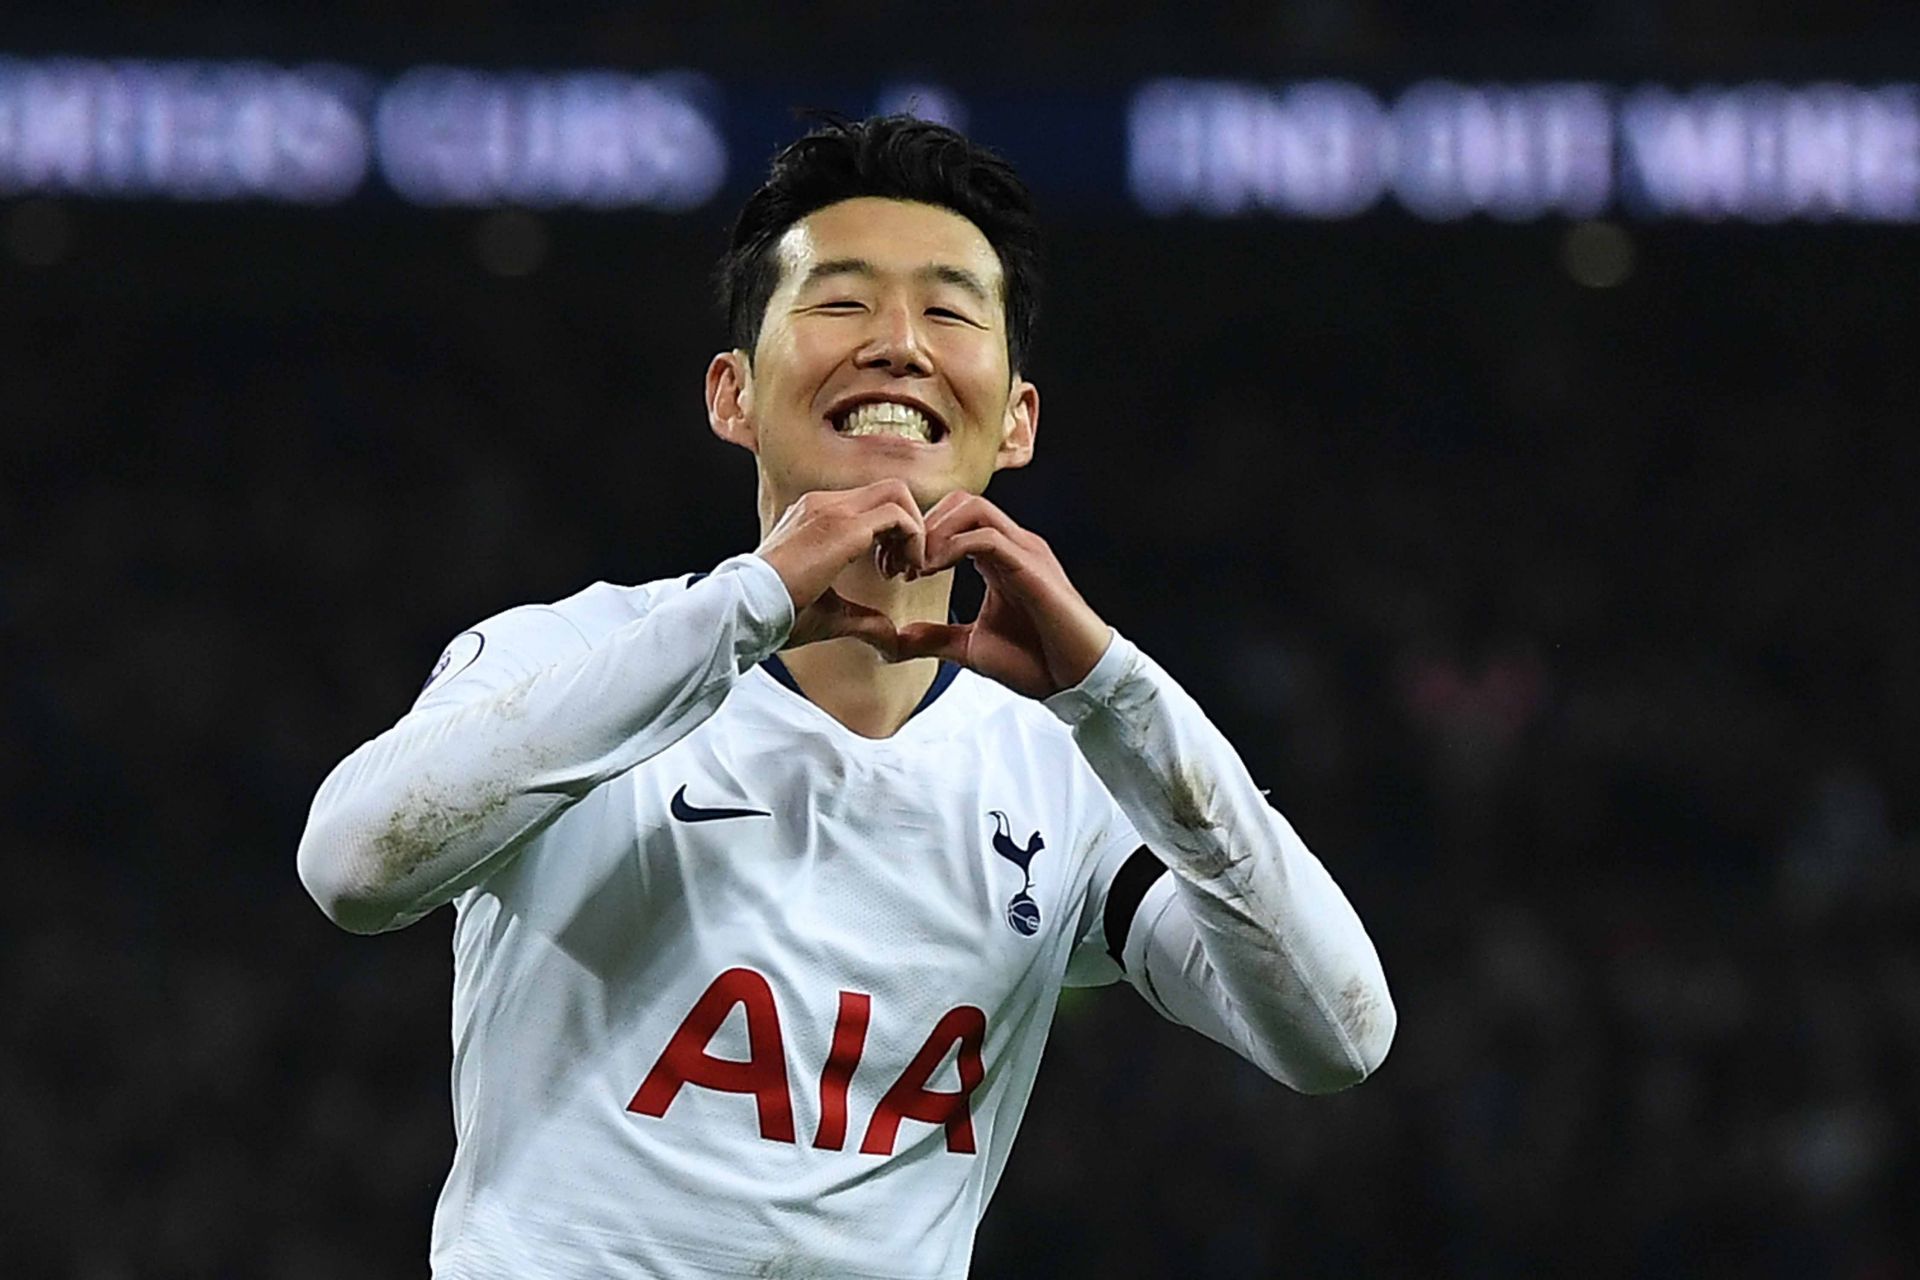 Son Heung-Min is among the most talented players in the Premier League